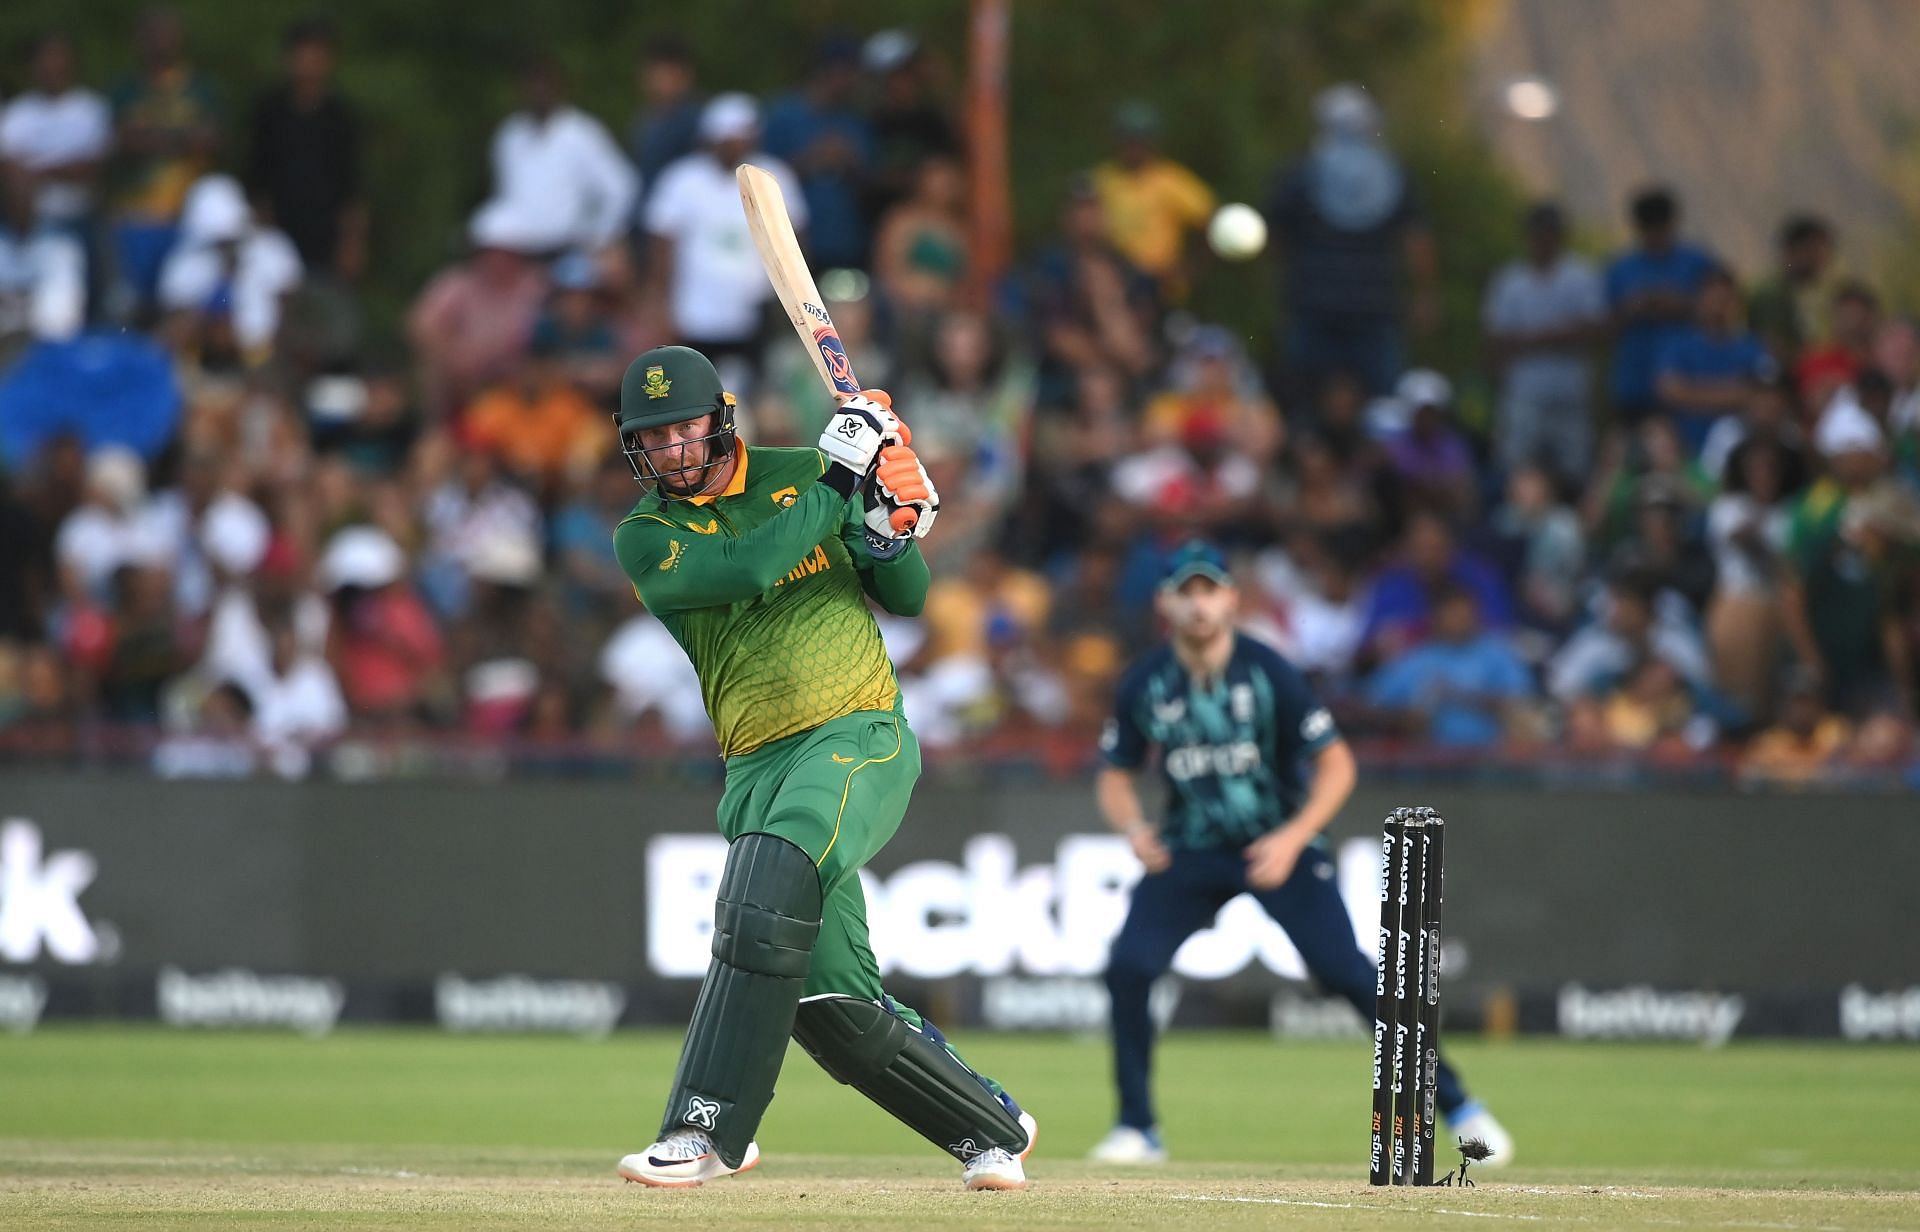 South Africa have won 20 points in the ICC Cricket World Cup Super League scoreboard after the series against England.  (Image: Getty)